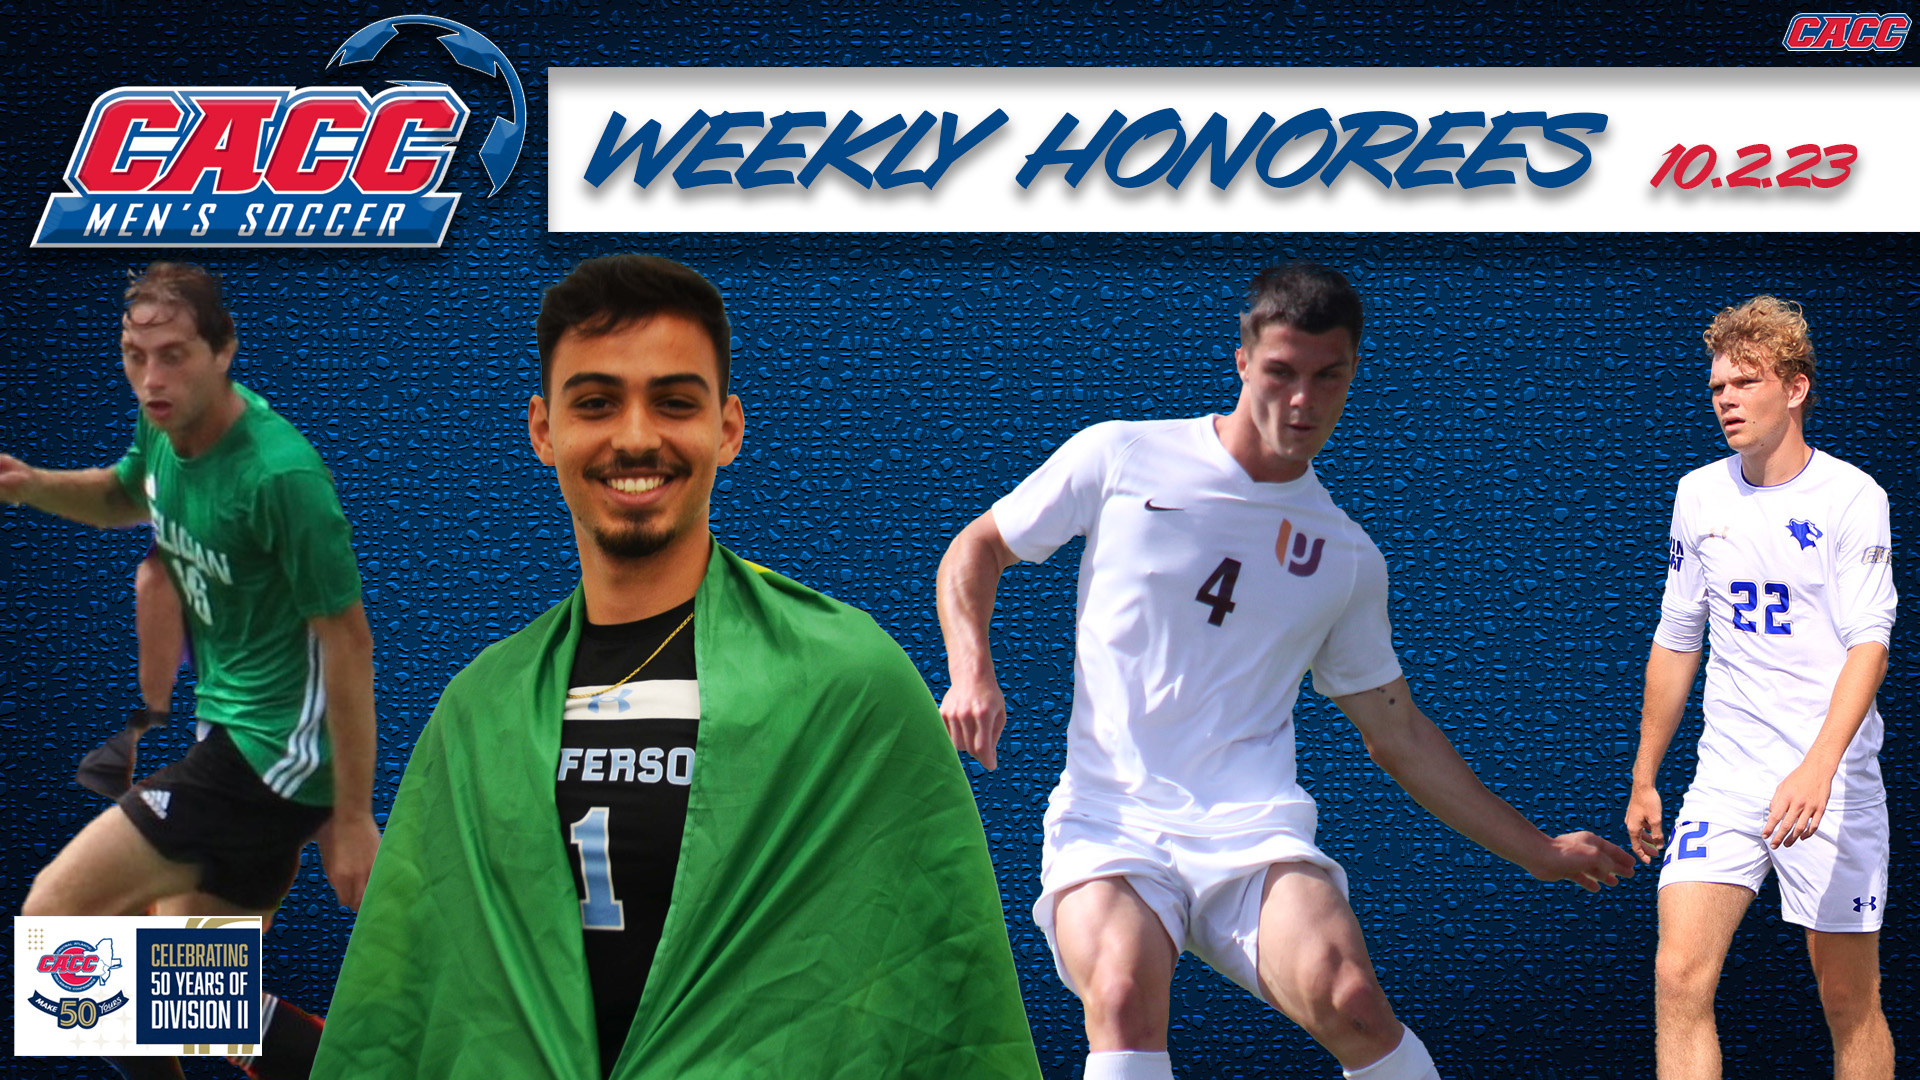 CACC Men's Soccer Weekly Honorees (10-2-23)